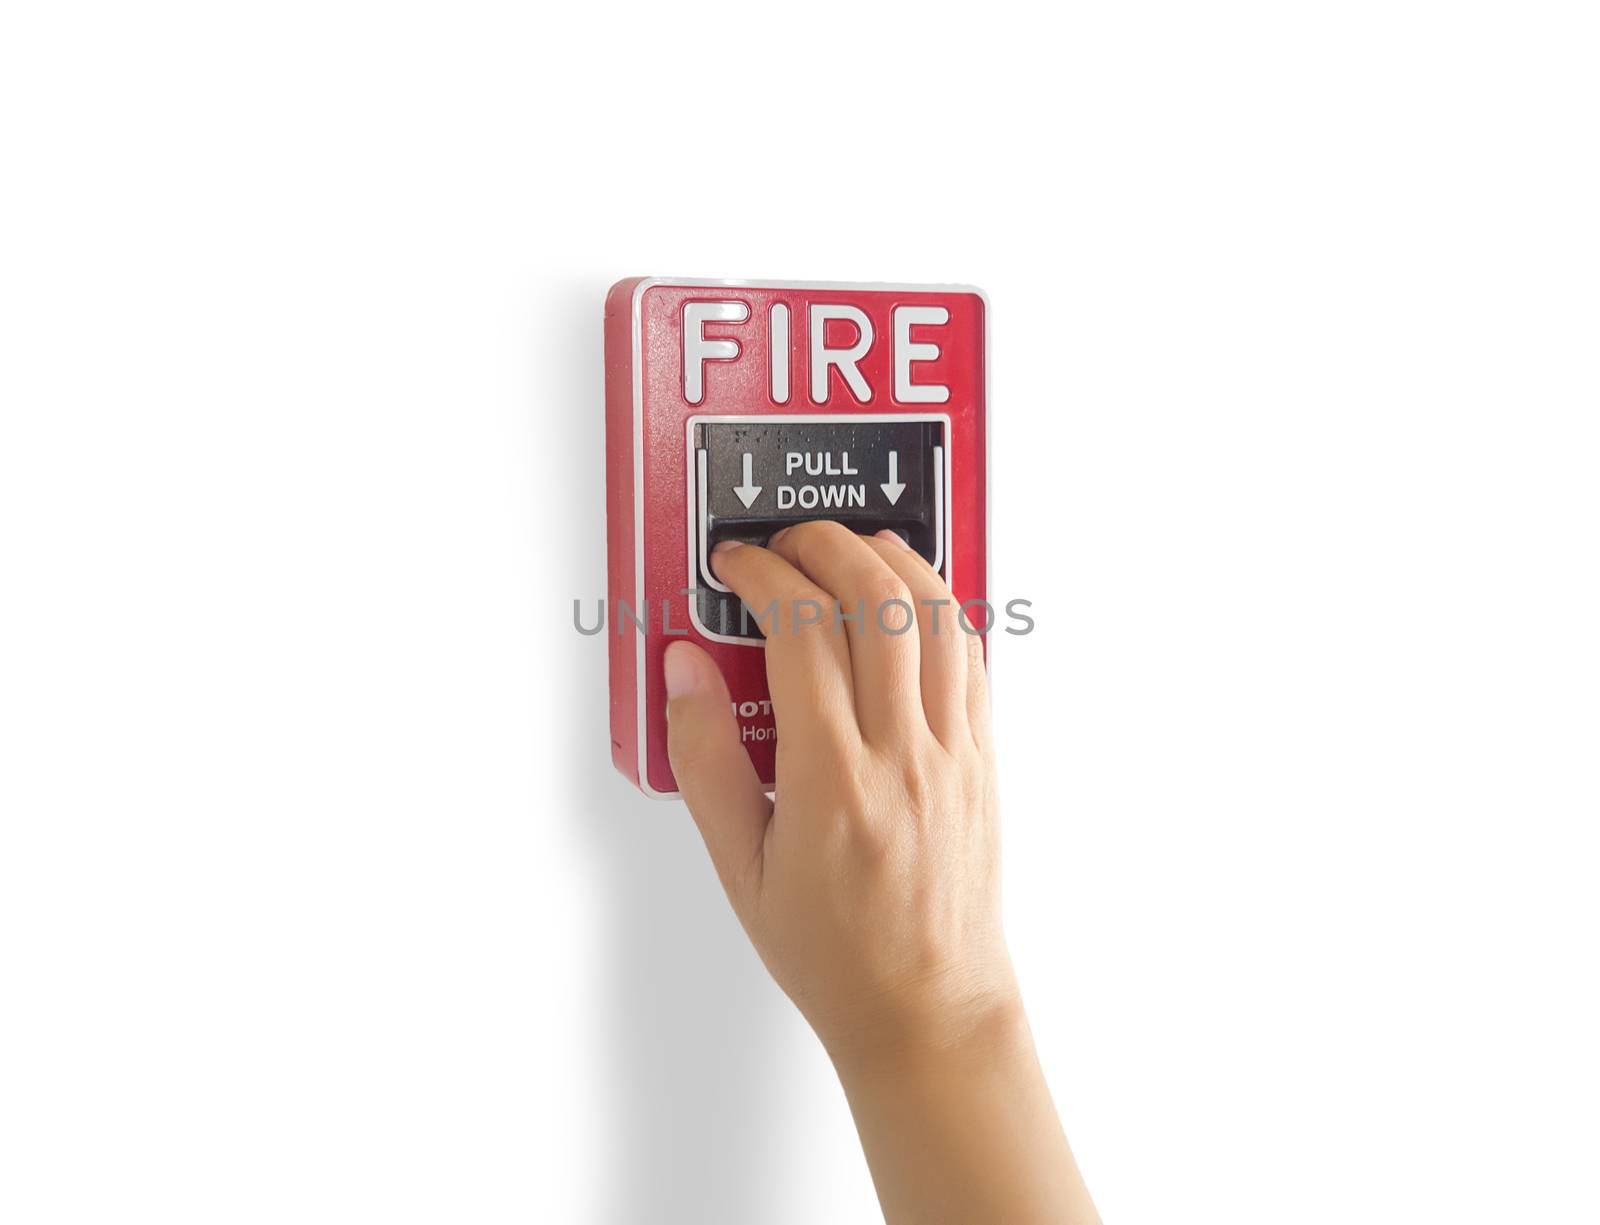 fire alarm notification appliance, hand pull down fire alarm system switch on the wall by manual for making a loud noise that gives warning of a fire alarm